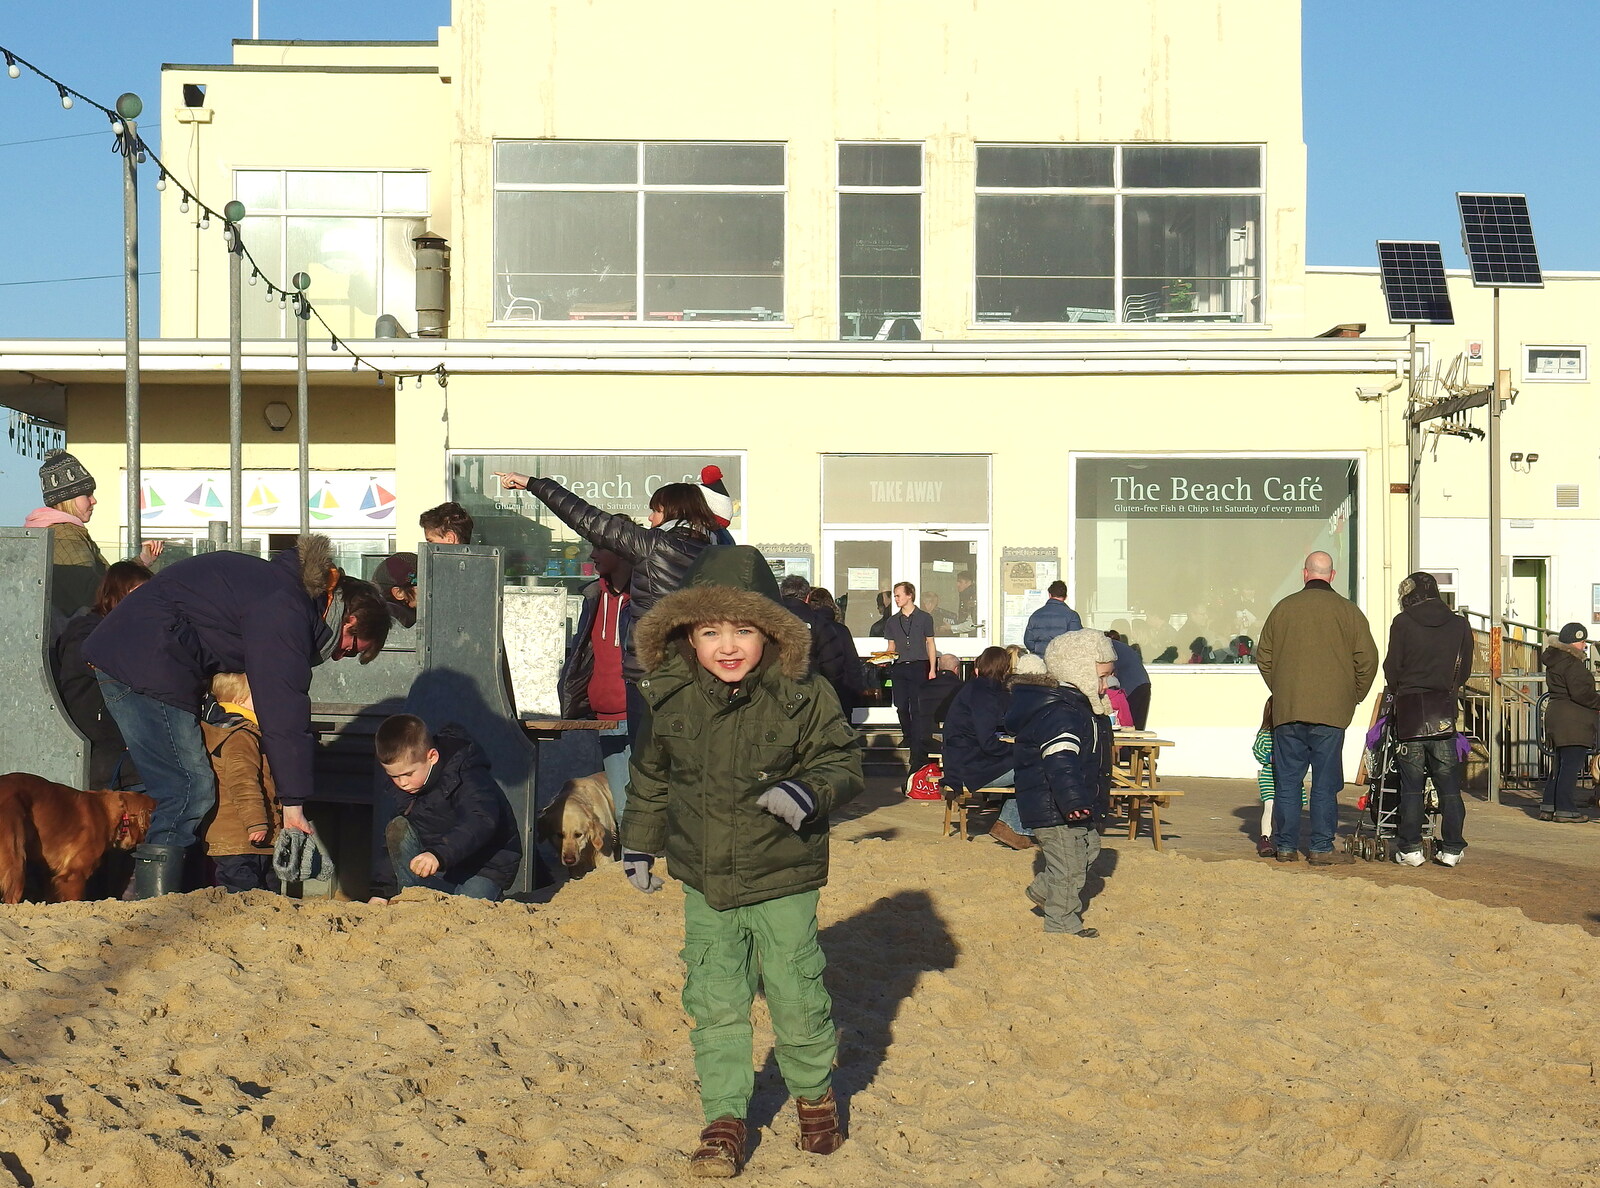 Fred on the sand from Post-Christmas Southwold, Suffolk - 29th December 2013